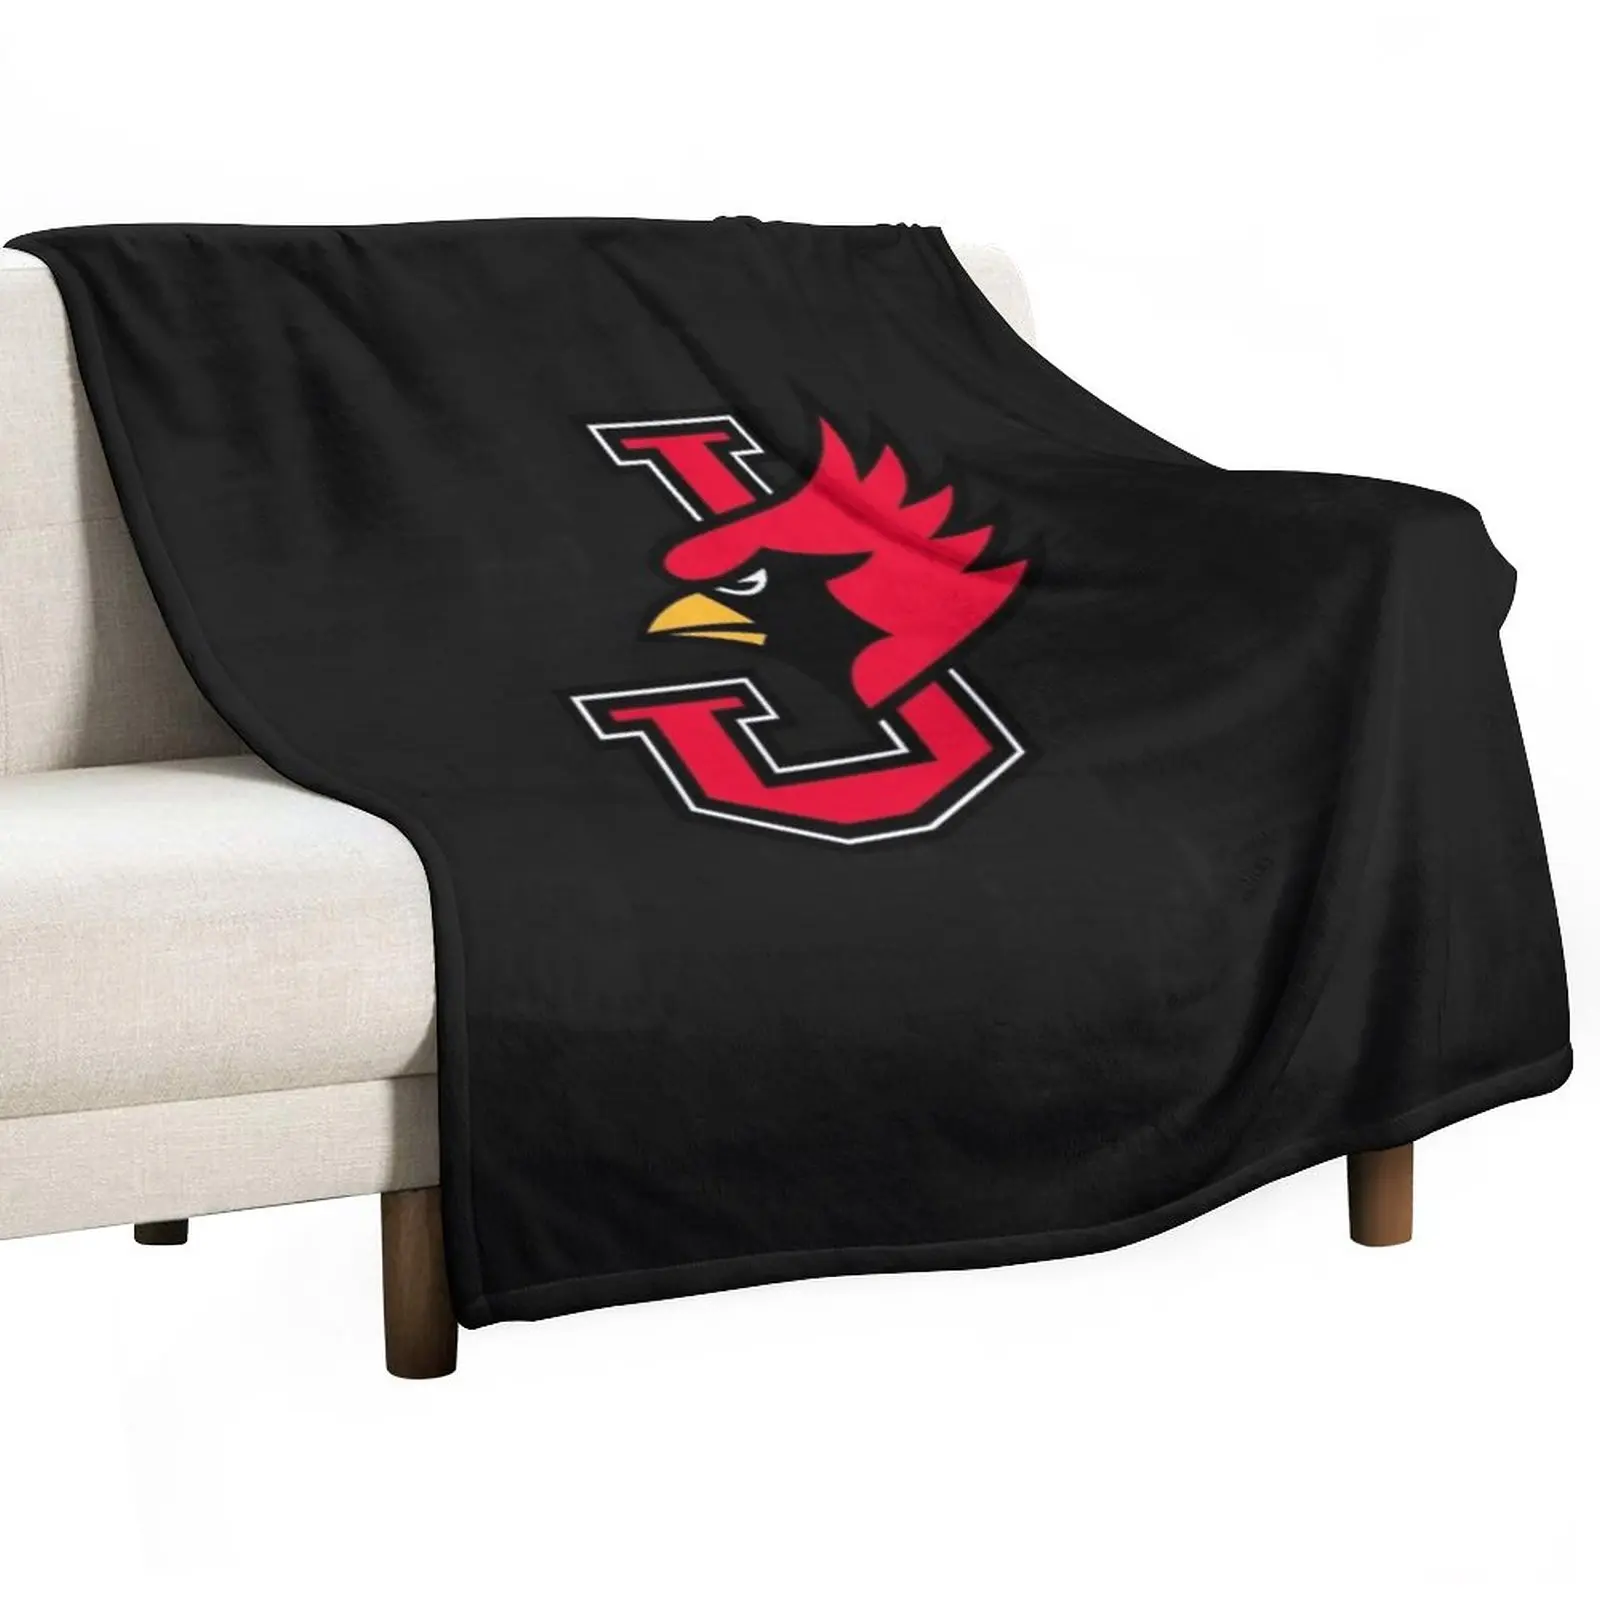 

The William Jewell CardinalsClassic T-Shirt Throw Blanket Plaid on the sofa sofa bed Luxury Throw Blanket